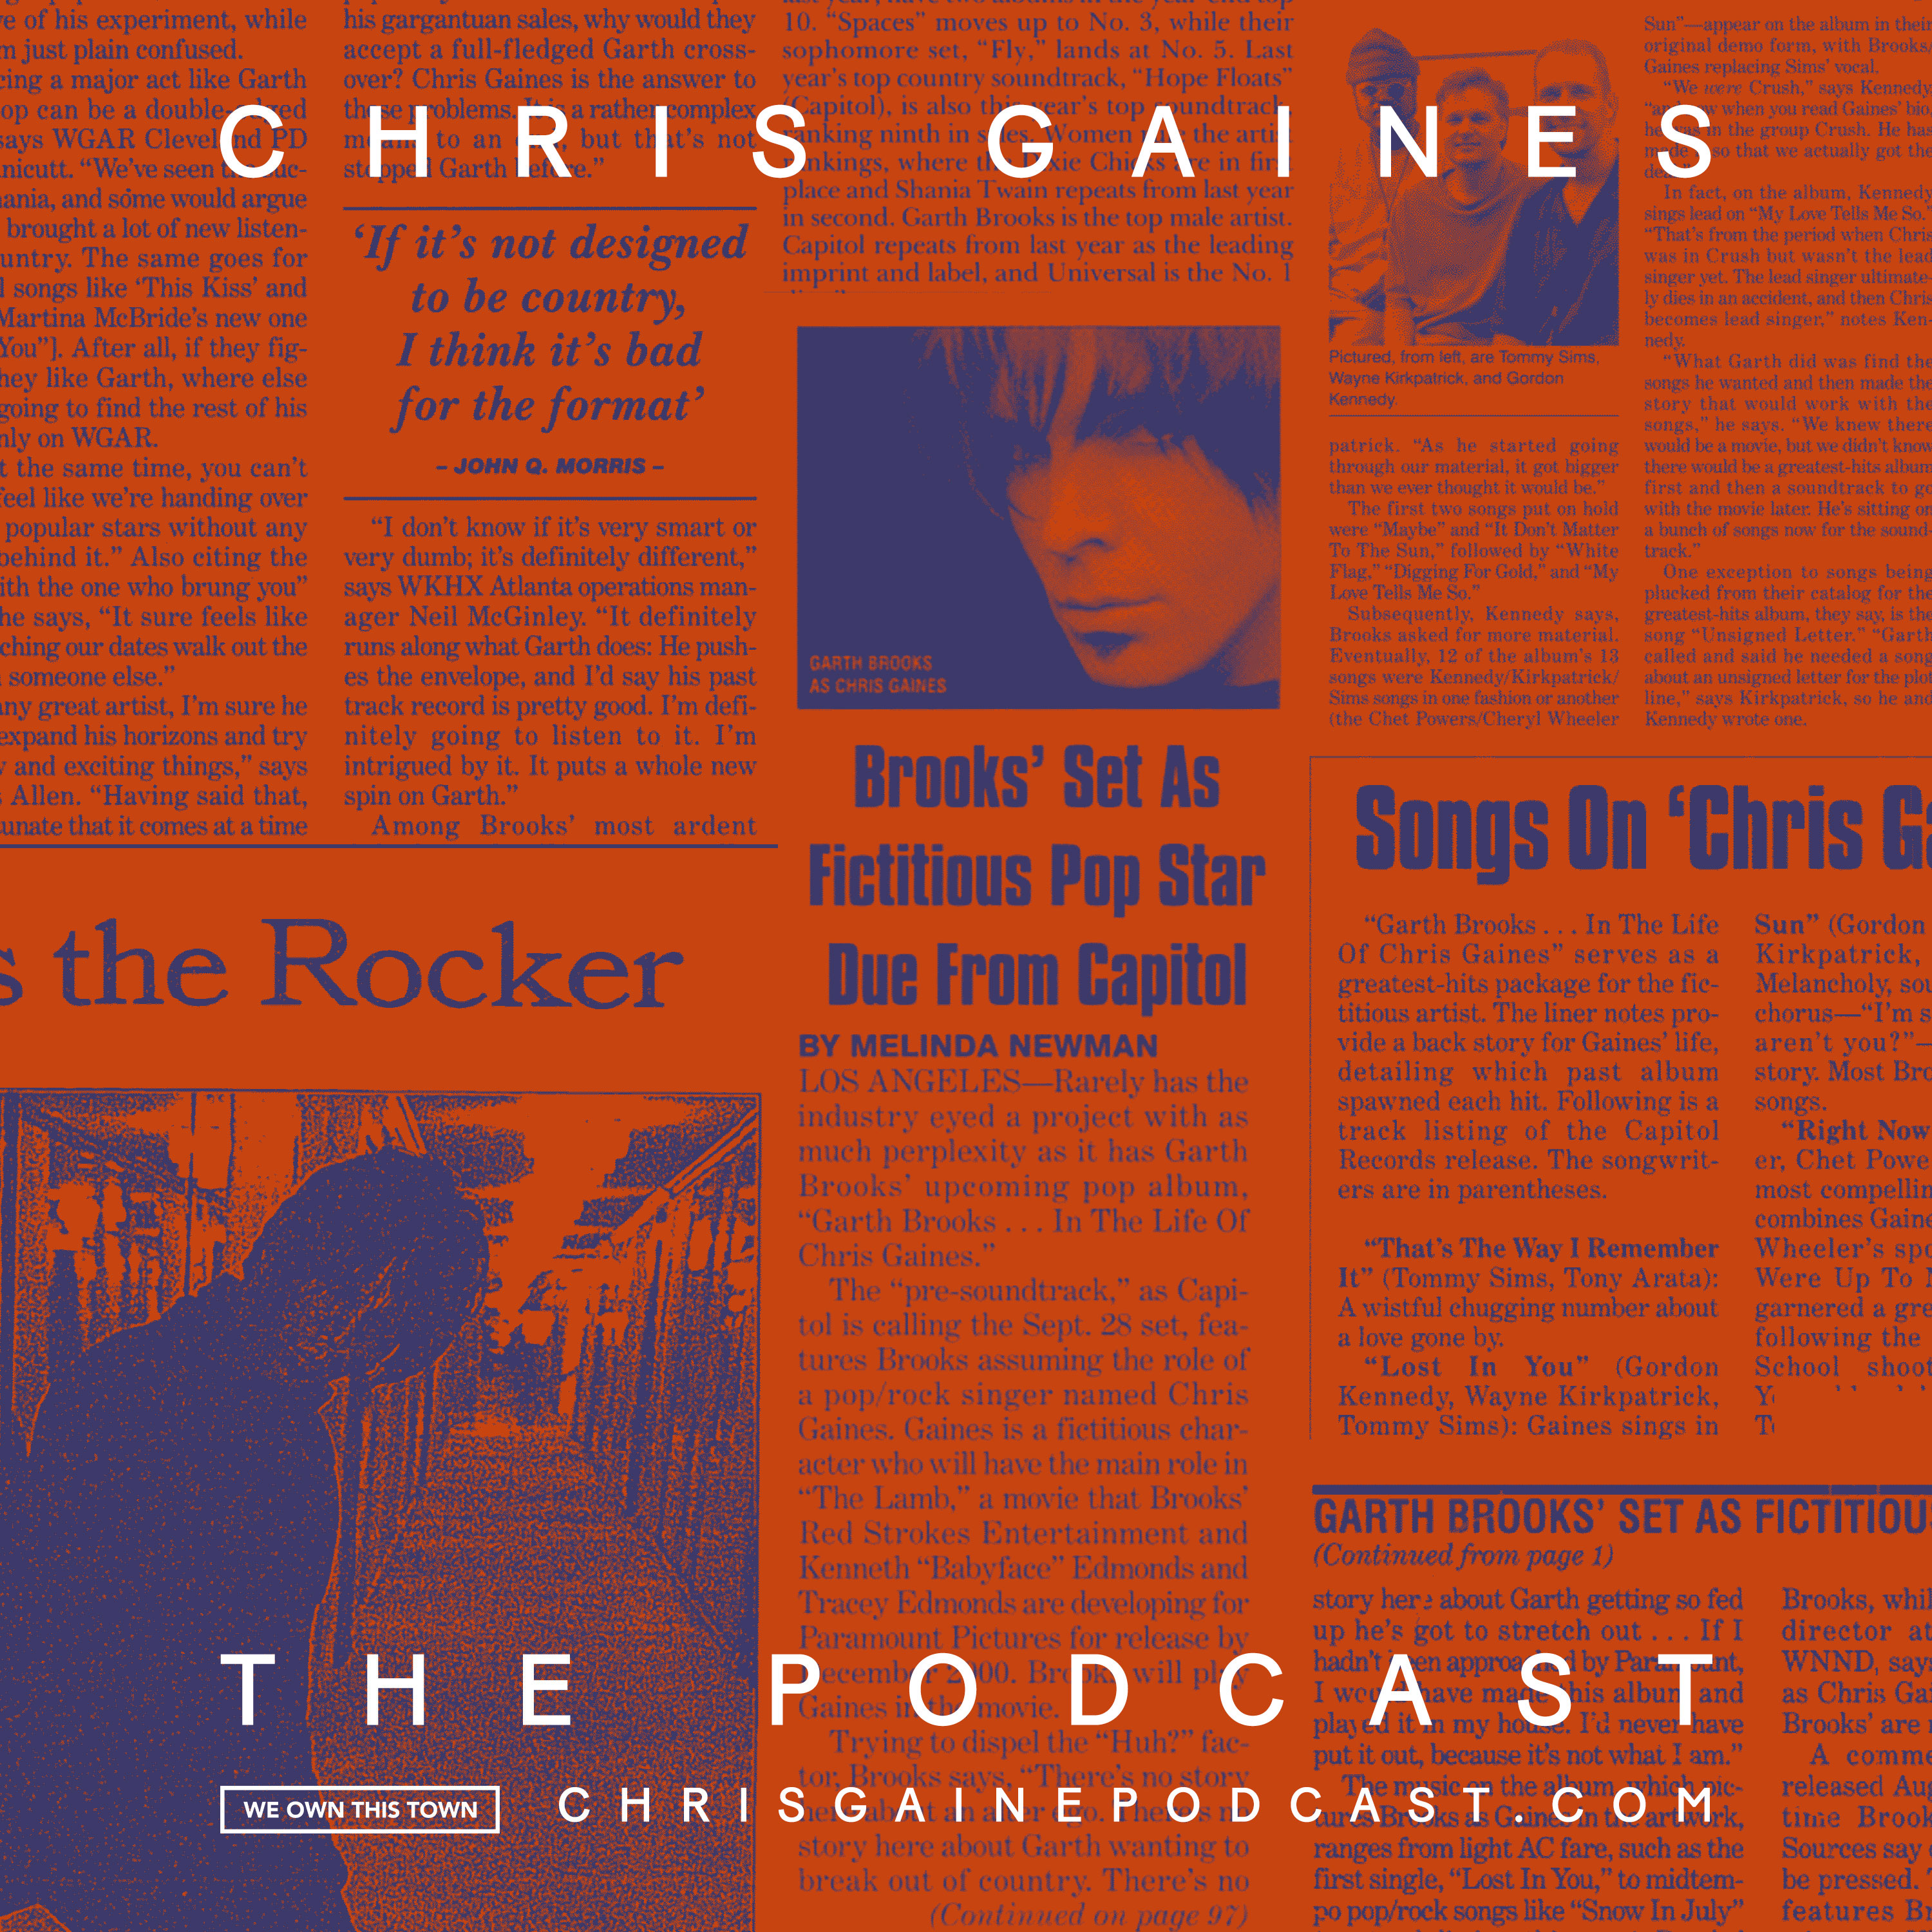 The Critical Assertions of Chris Gaines